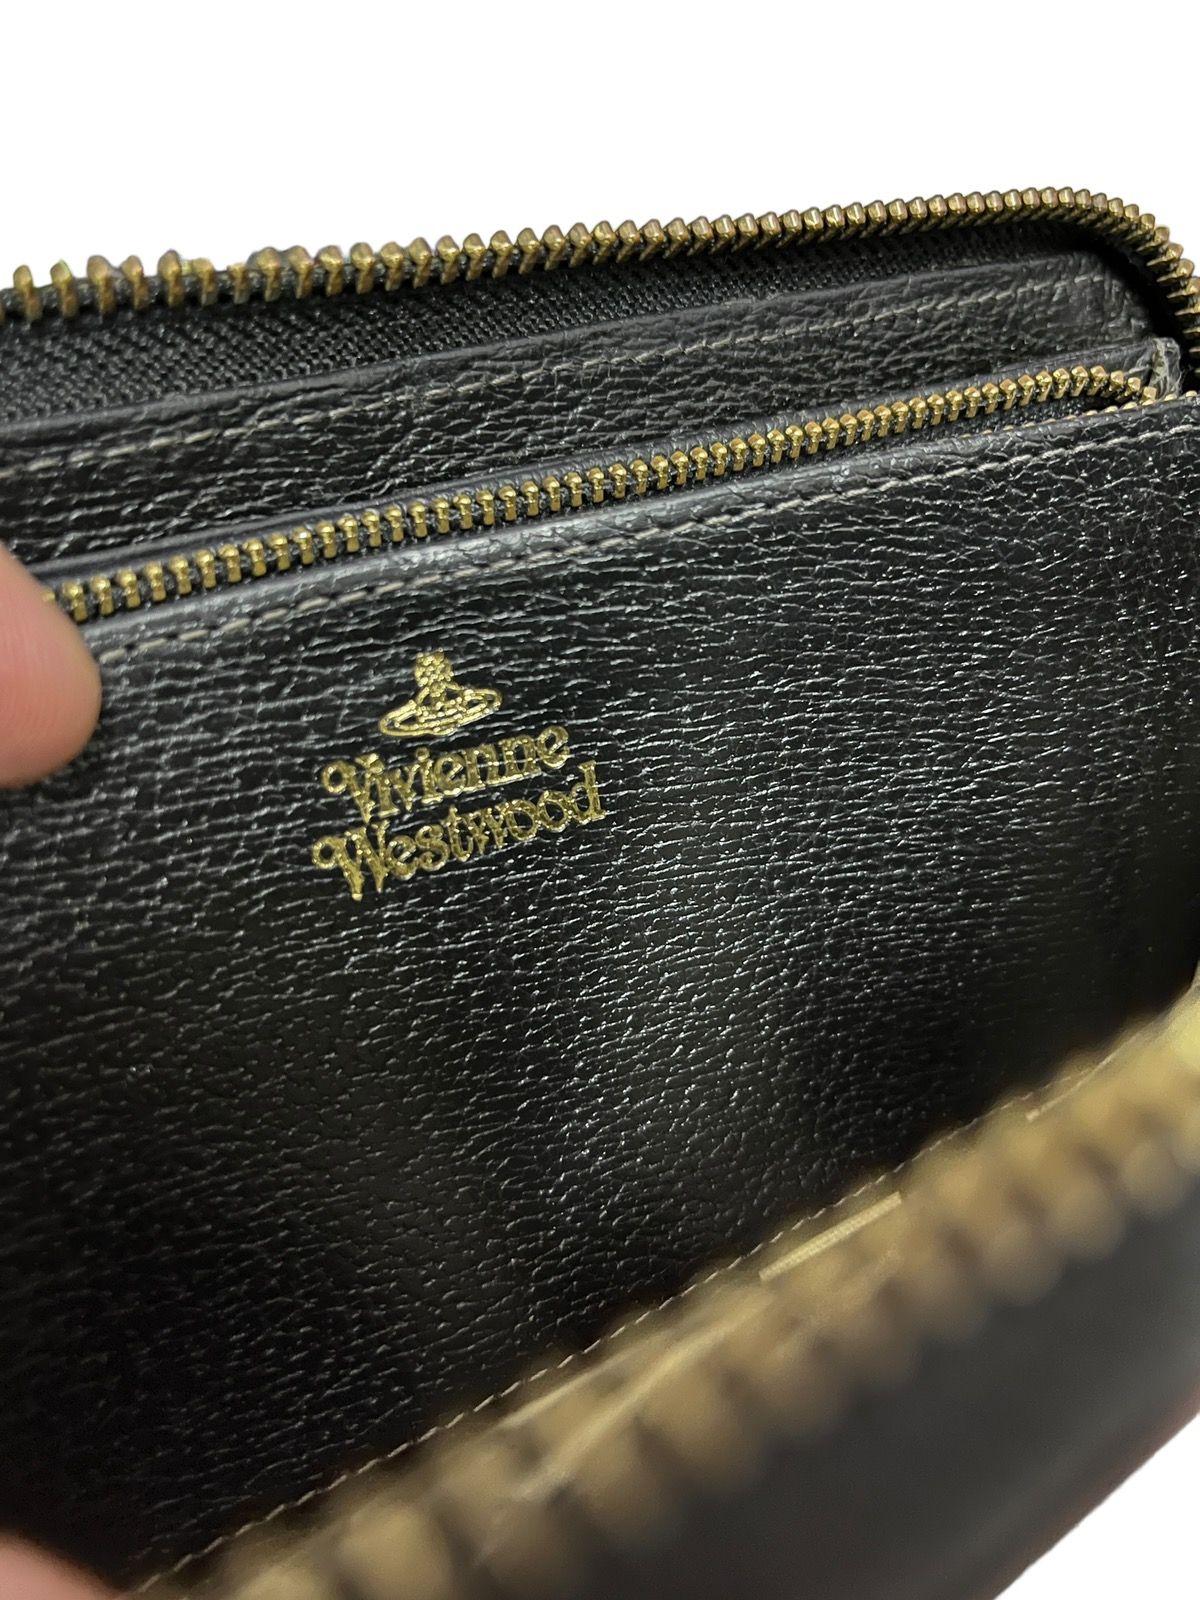 ✅FREE SHIPPING✅ Vivienne Westwood Big Orb Gold - 9